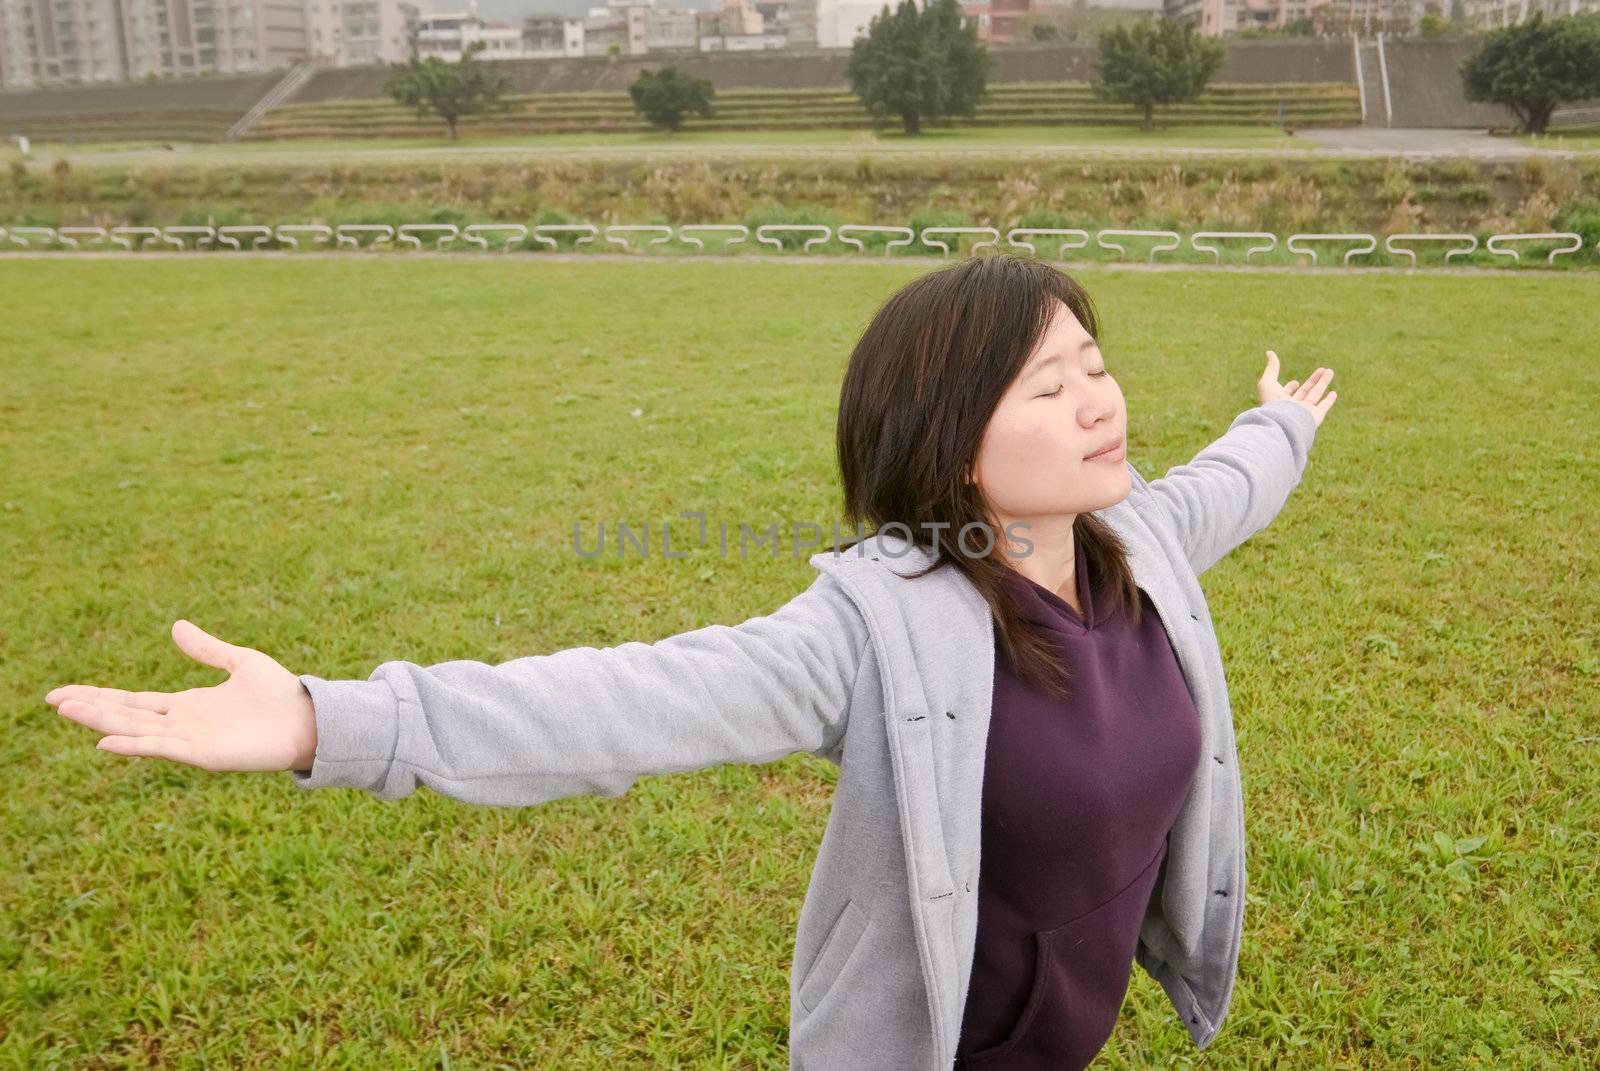 Freedom expression of Asian woman with open arms and closed eyes in outdoor of park of city.